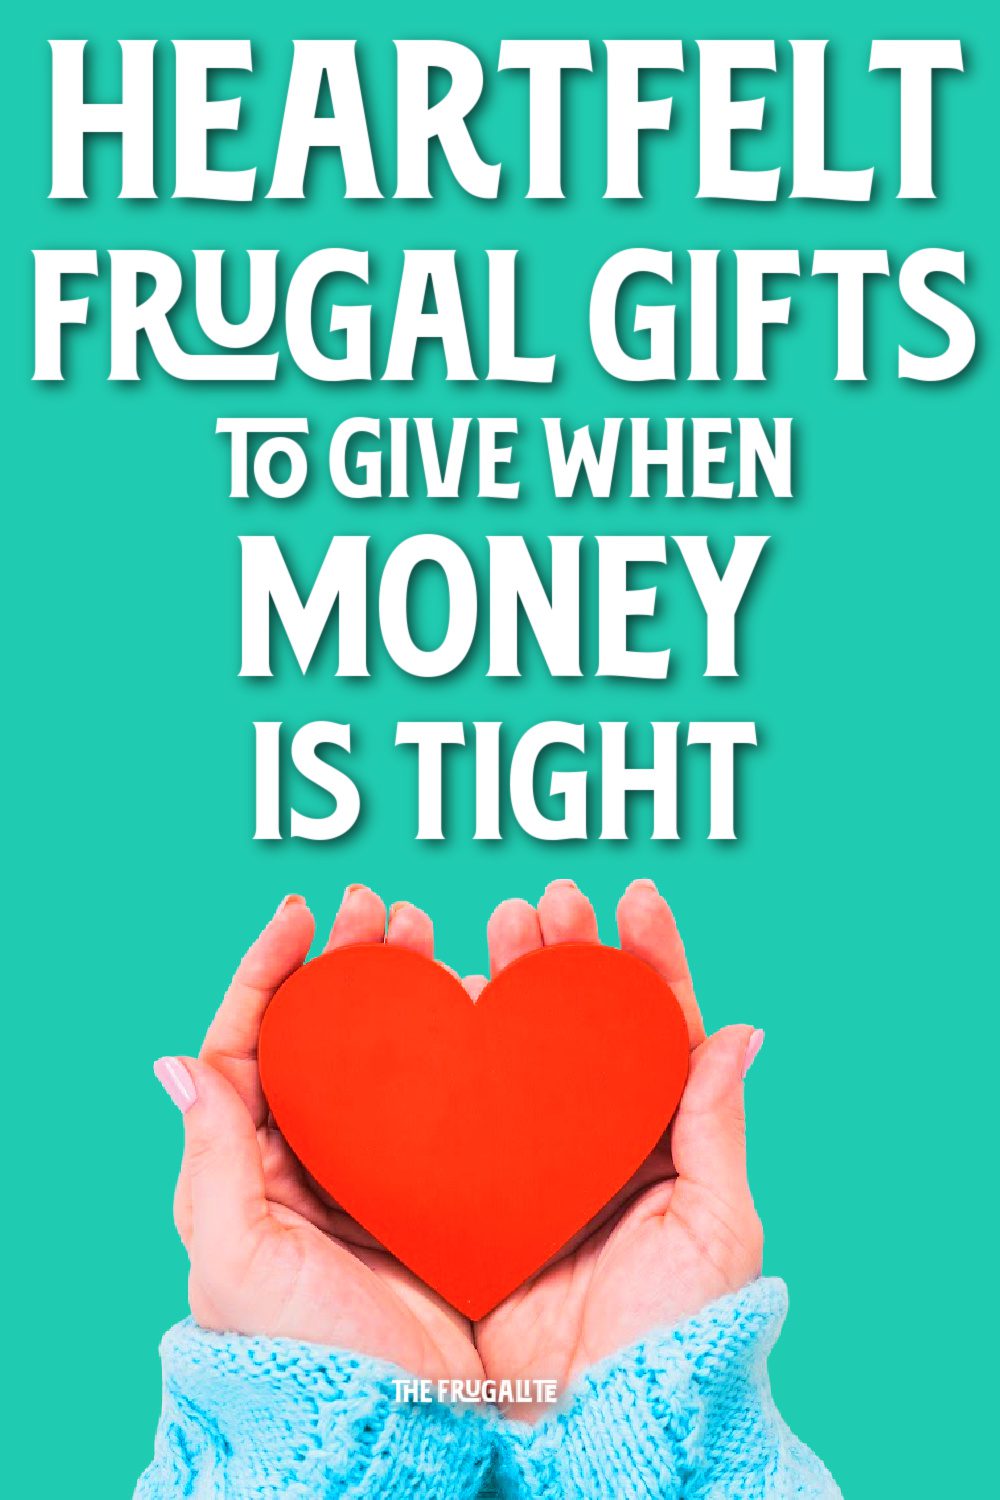 Heartfelt Frugal Gifts to Give When Money is Tight